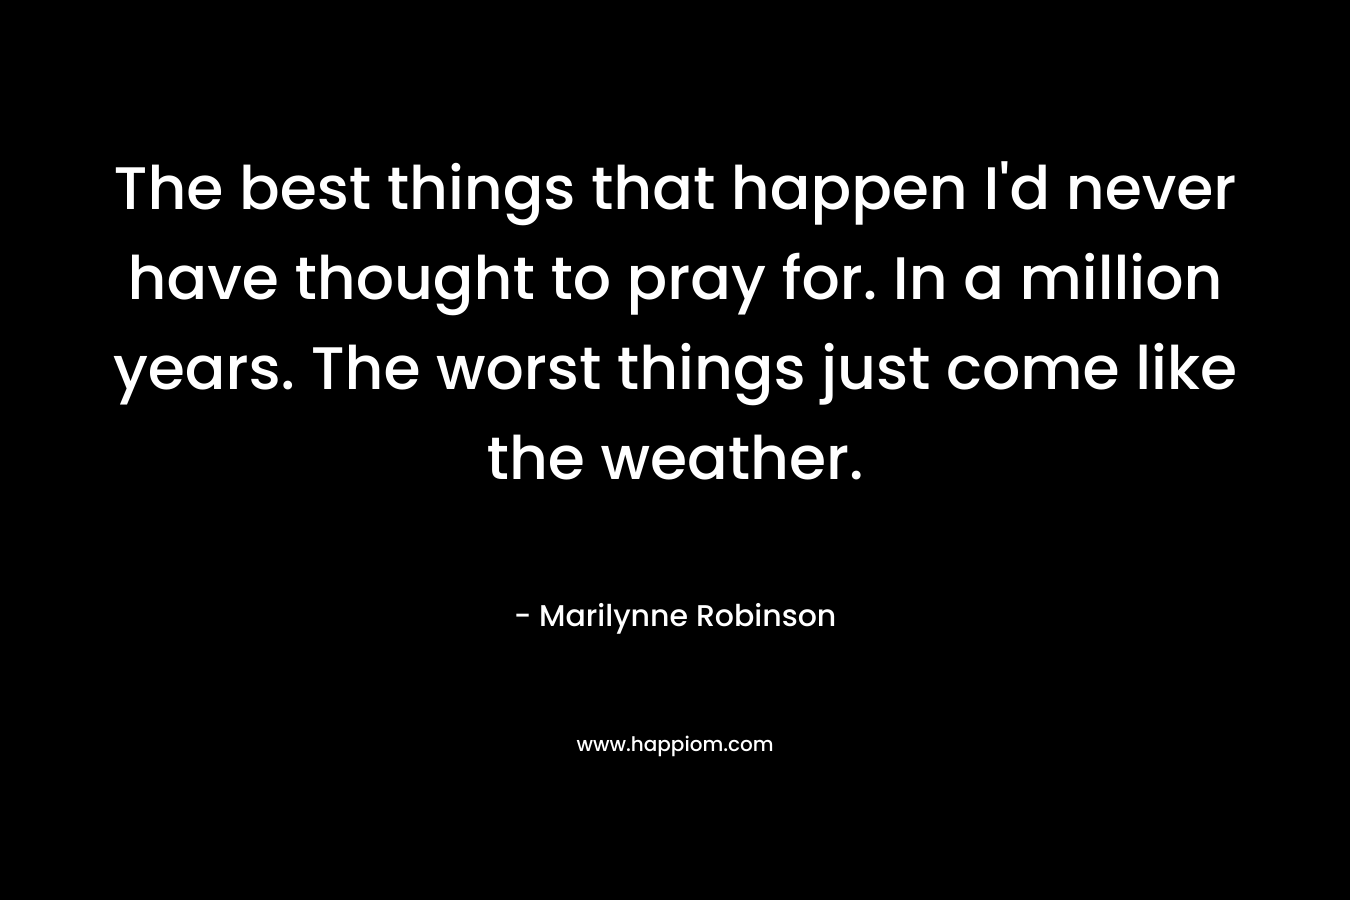 The best things that happen I’d never have thought to pray for. In a million years. The worst things just come like the weather. – Marilynne Robinson